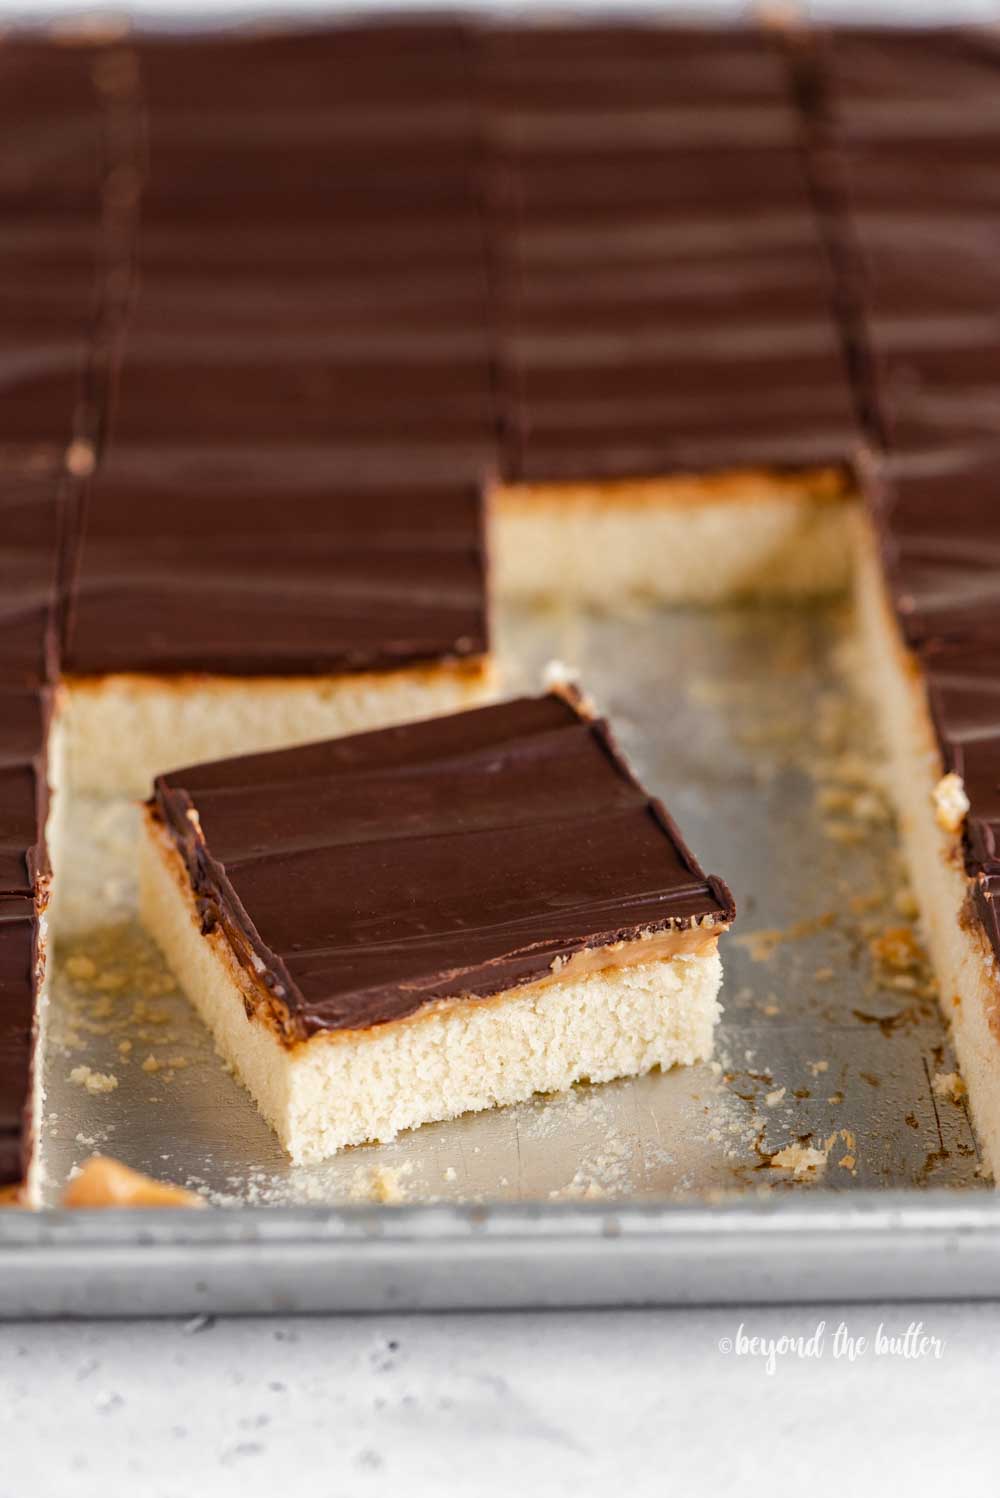 Angled image of cut irresistible peanut butter tandy kakes with one angled out from the rest | All Images © Beyond the Butter™